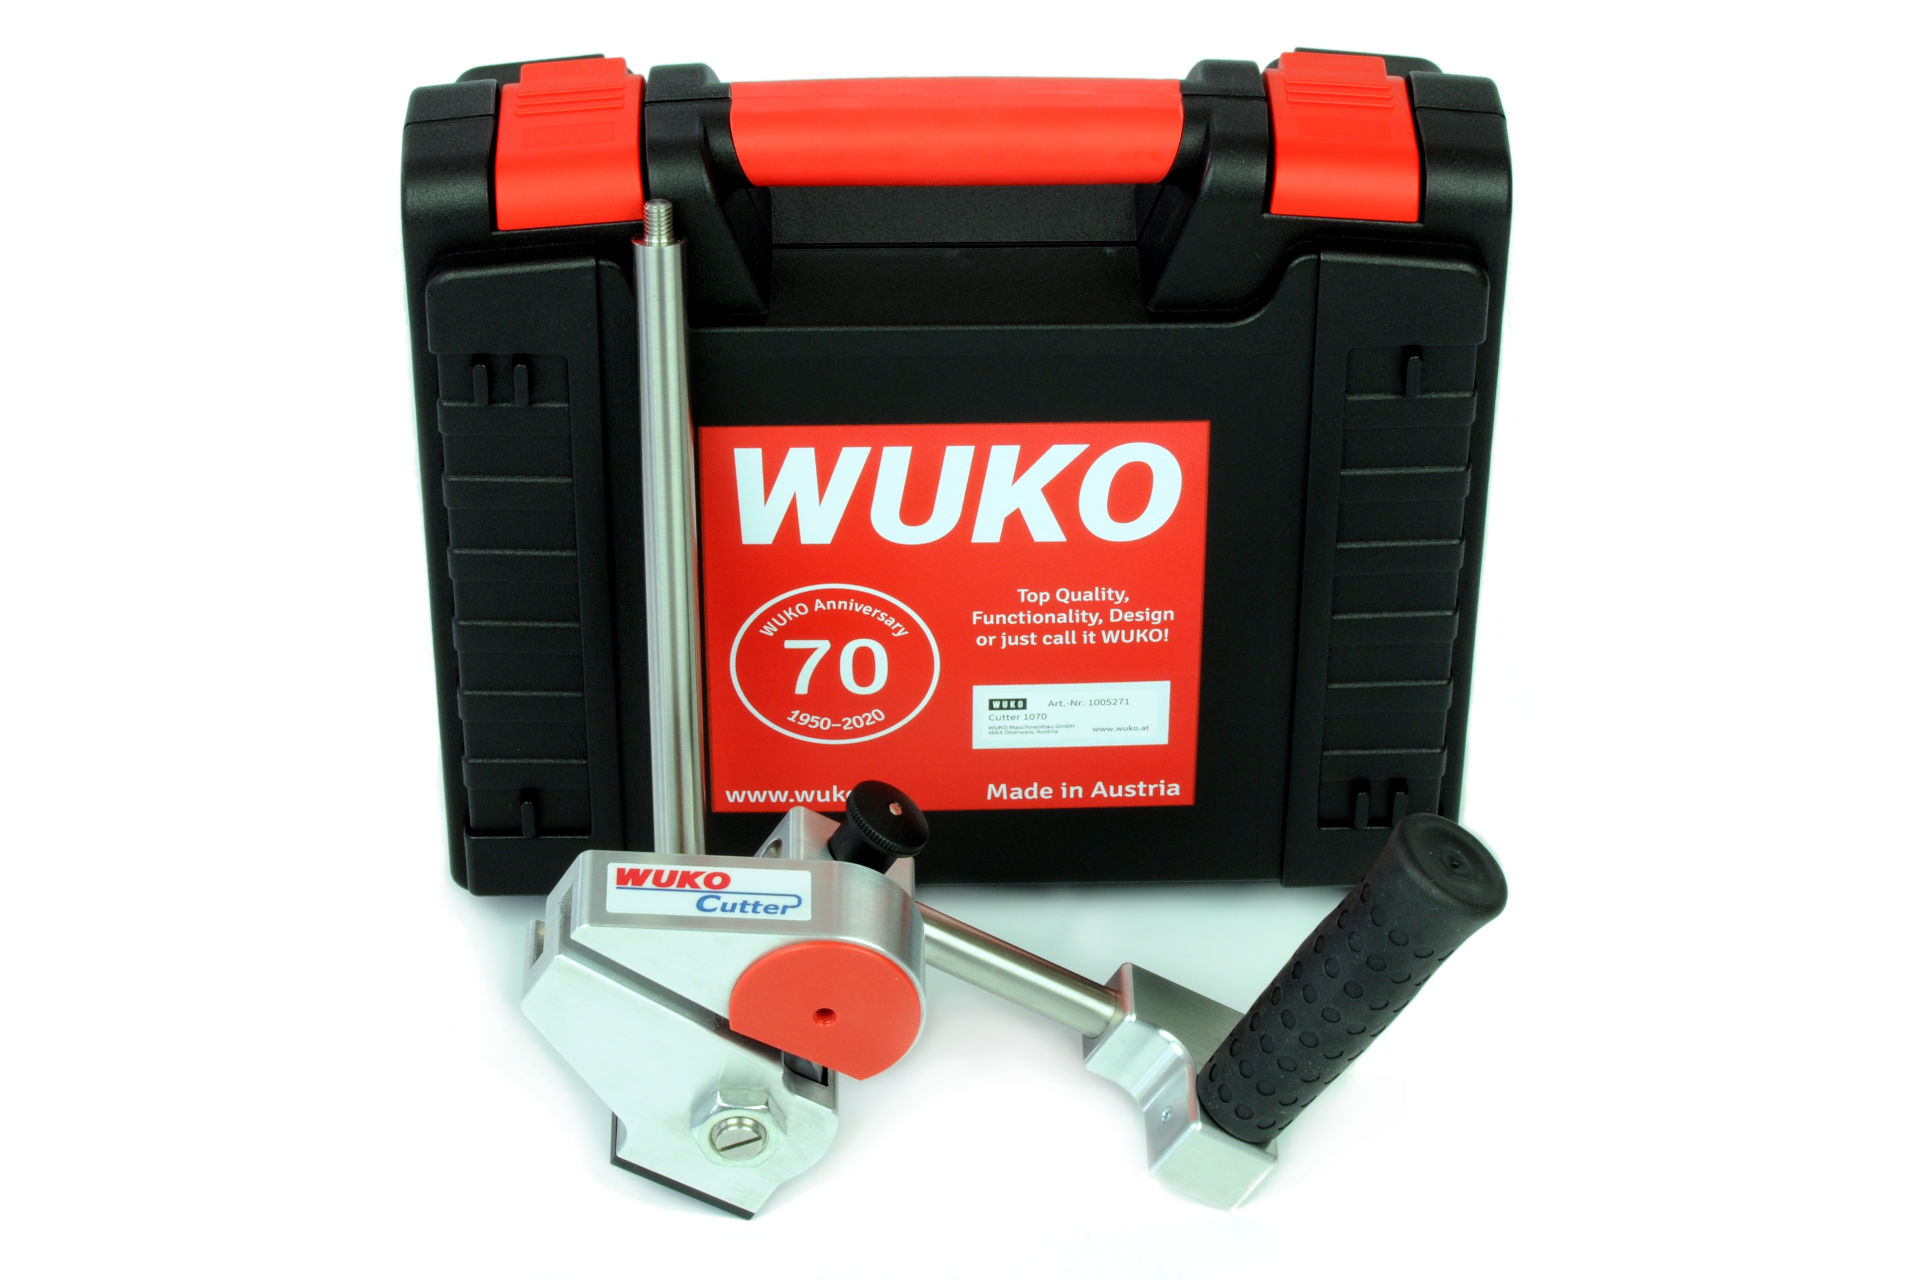 WUKO Cutter 1070 with carrying case